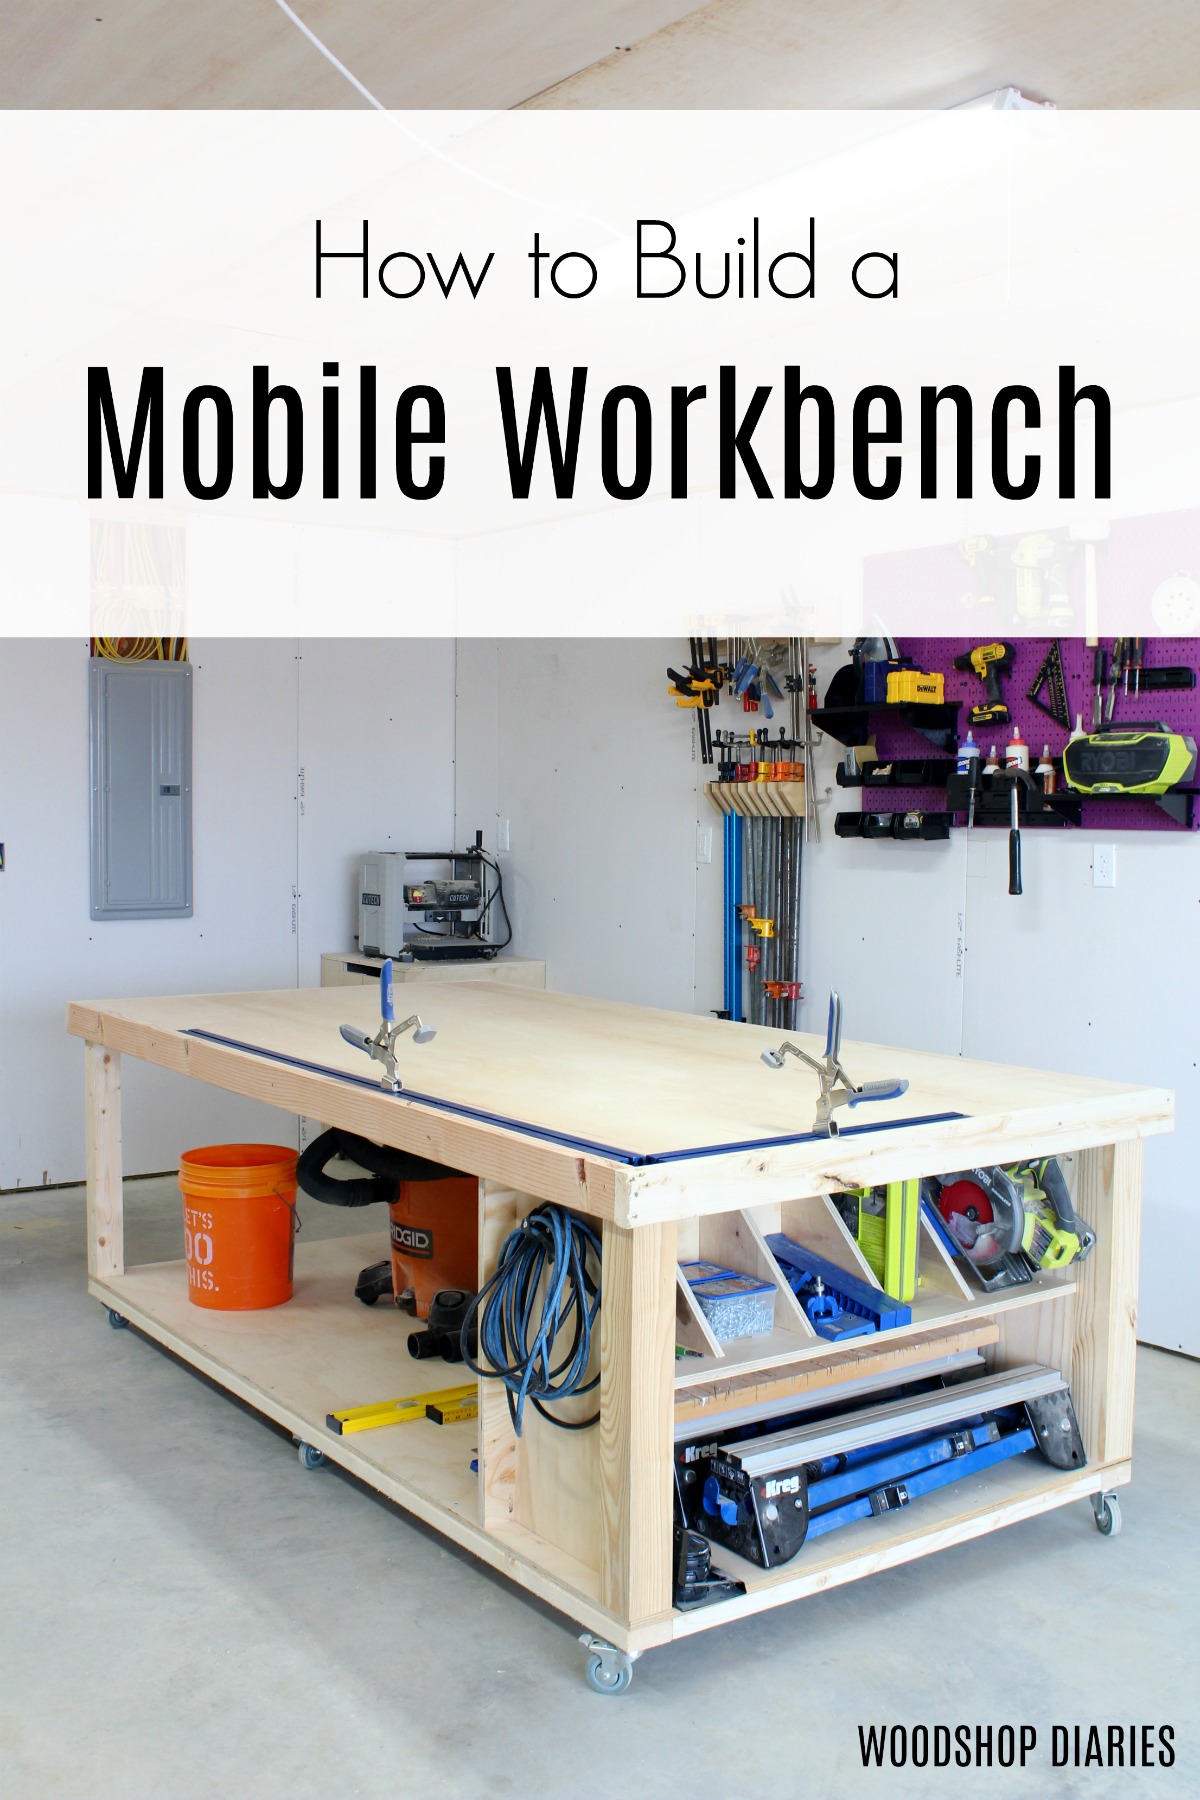 https://www.woodshopdiaries.com/wp-content/uploads/2019/01/How-to-Build-a-DIY-Mobile-Workbench-Pin.jpg